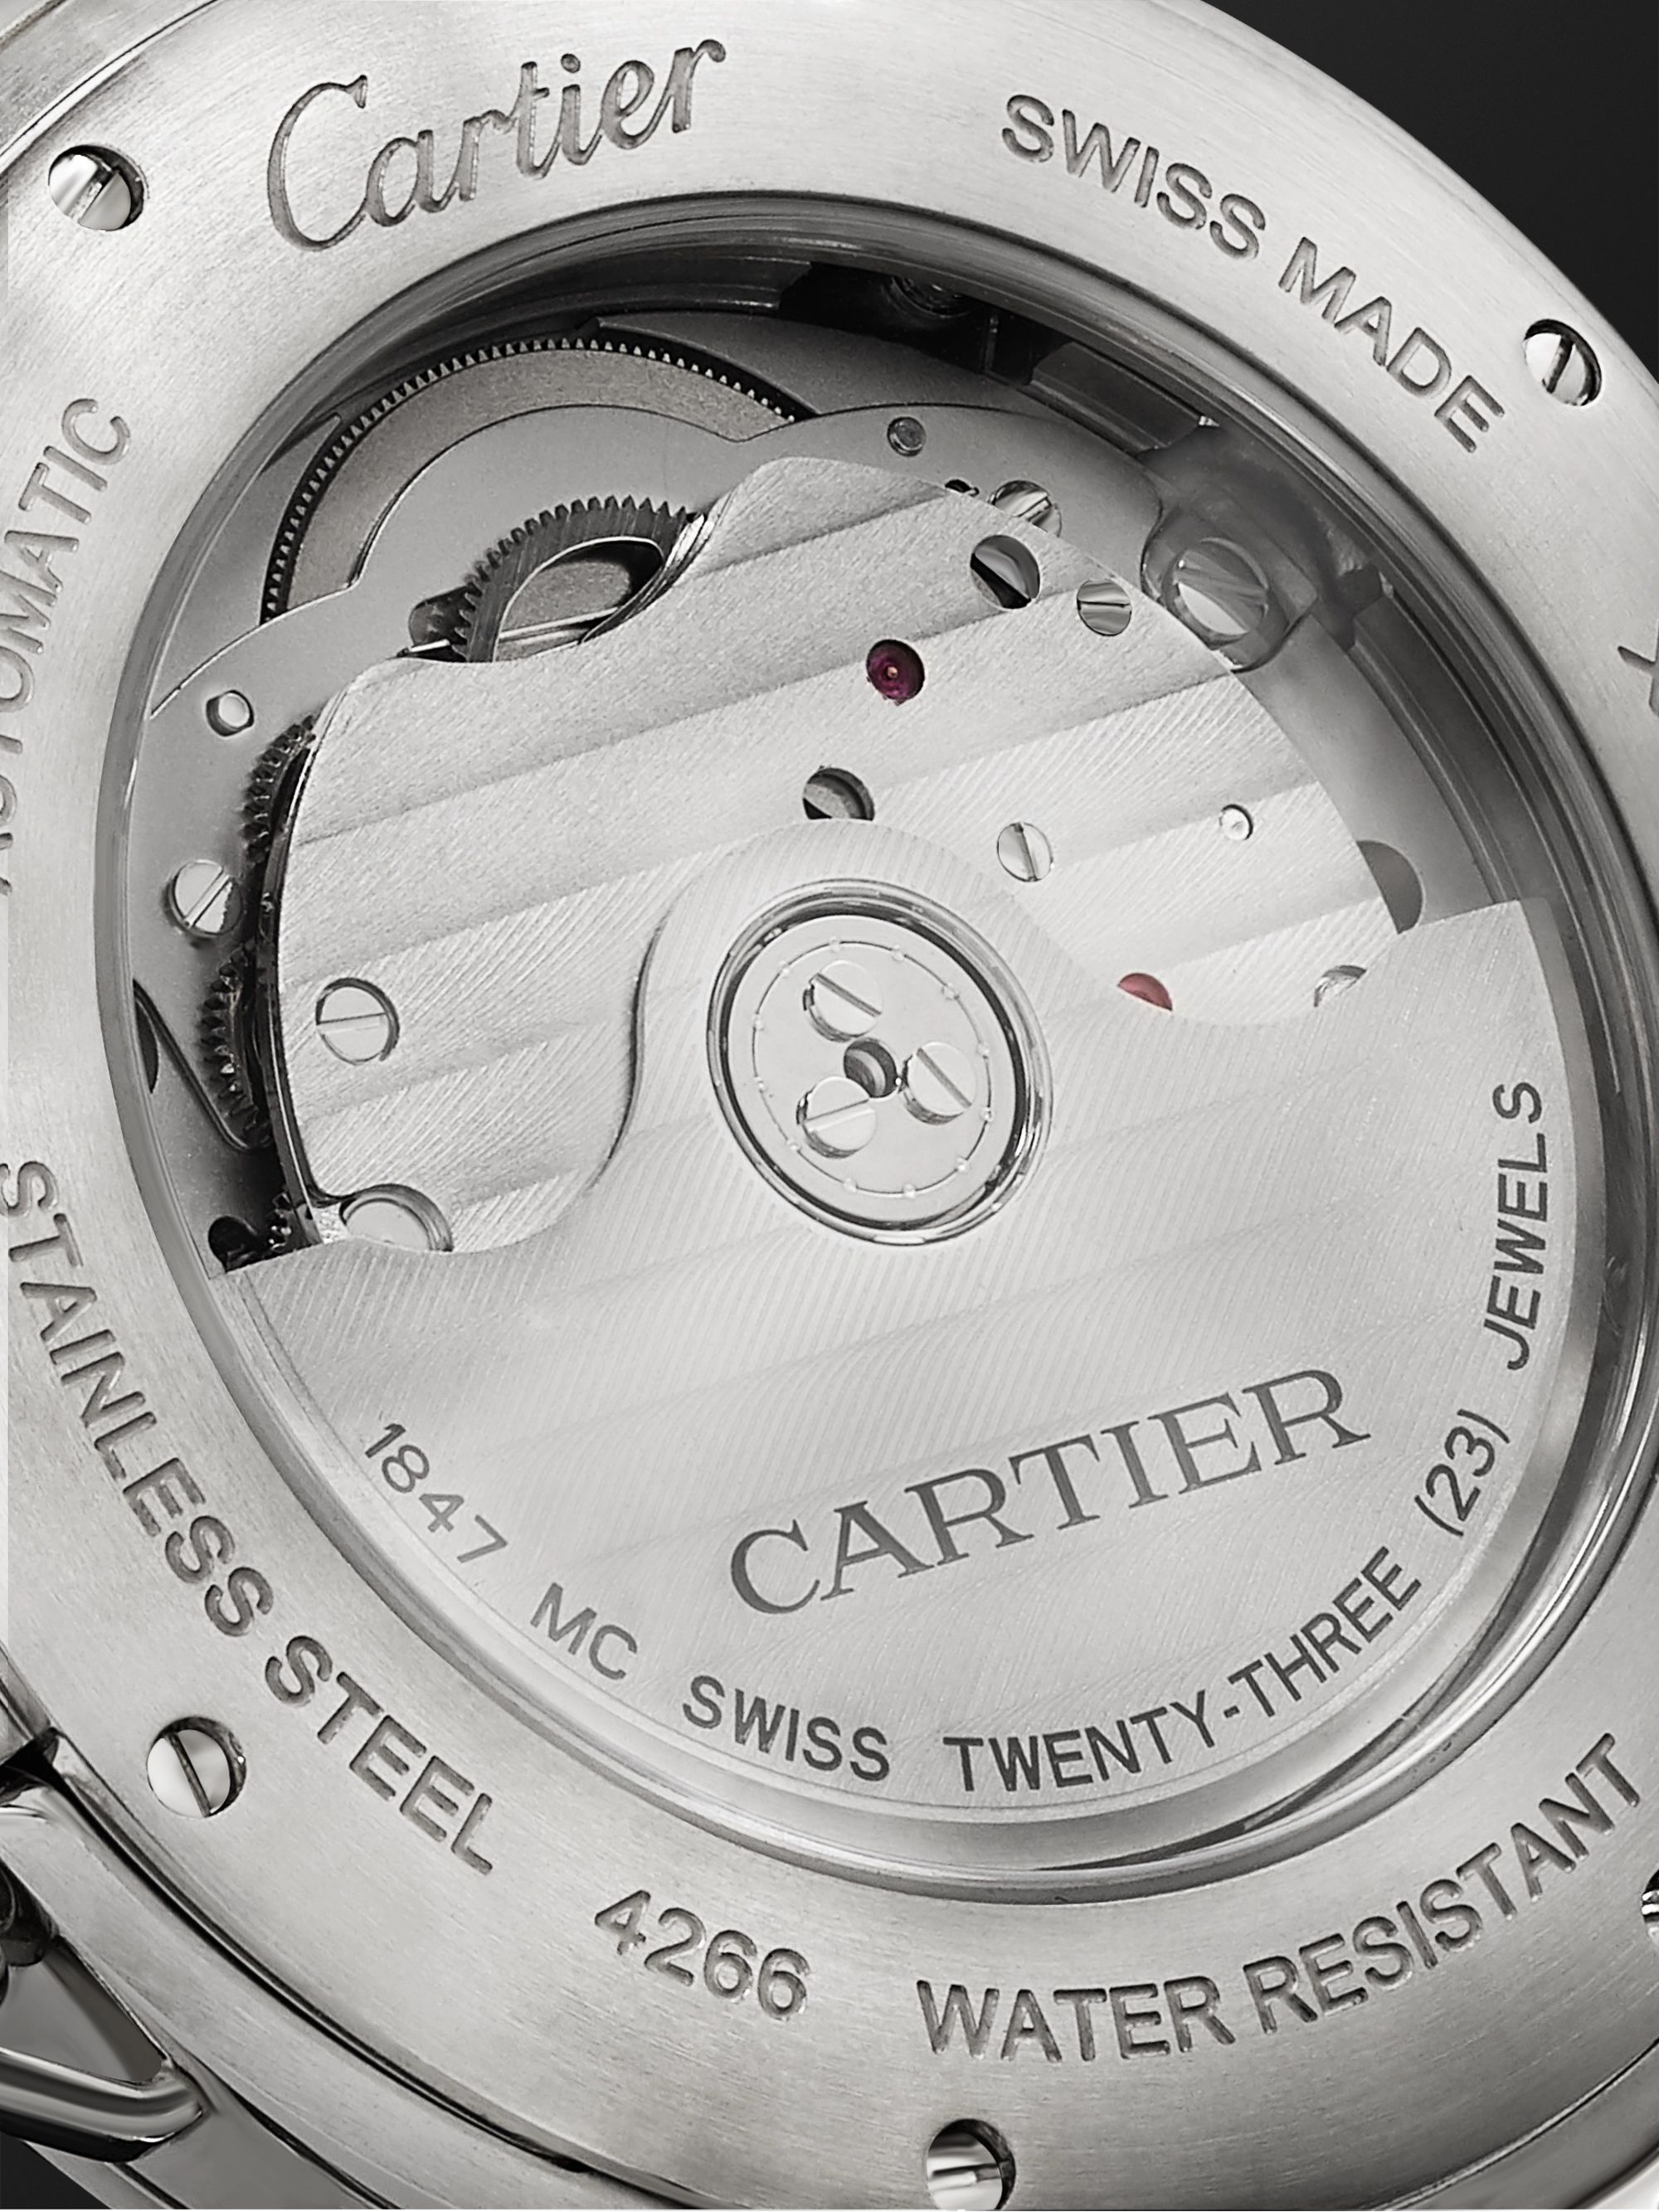 CARTIER Pasha de Cartier Automatic 41mm Stainless Steel and Alligator Watch, Ref. No. WSPA 0009